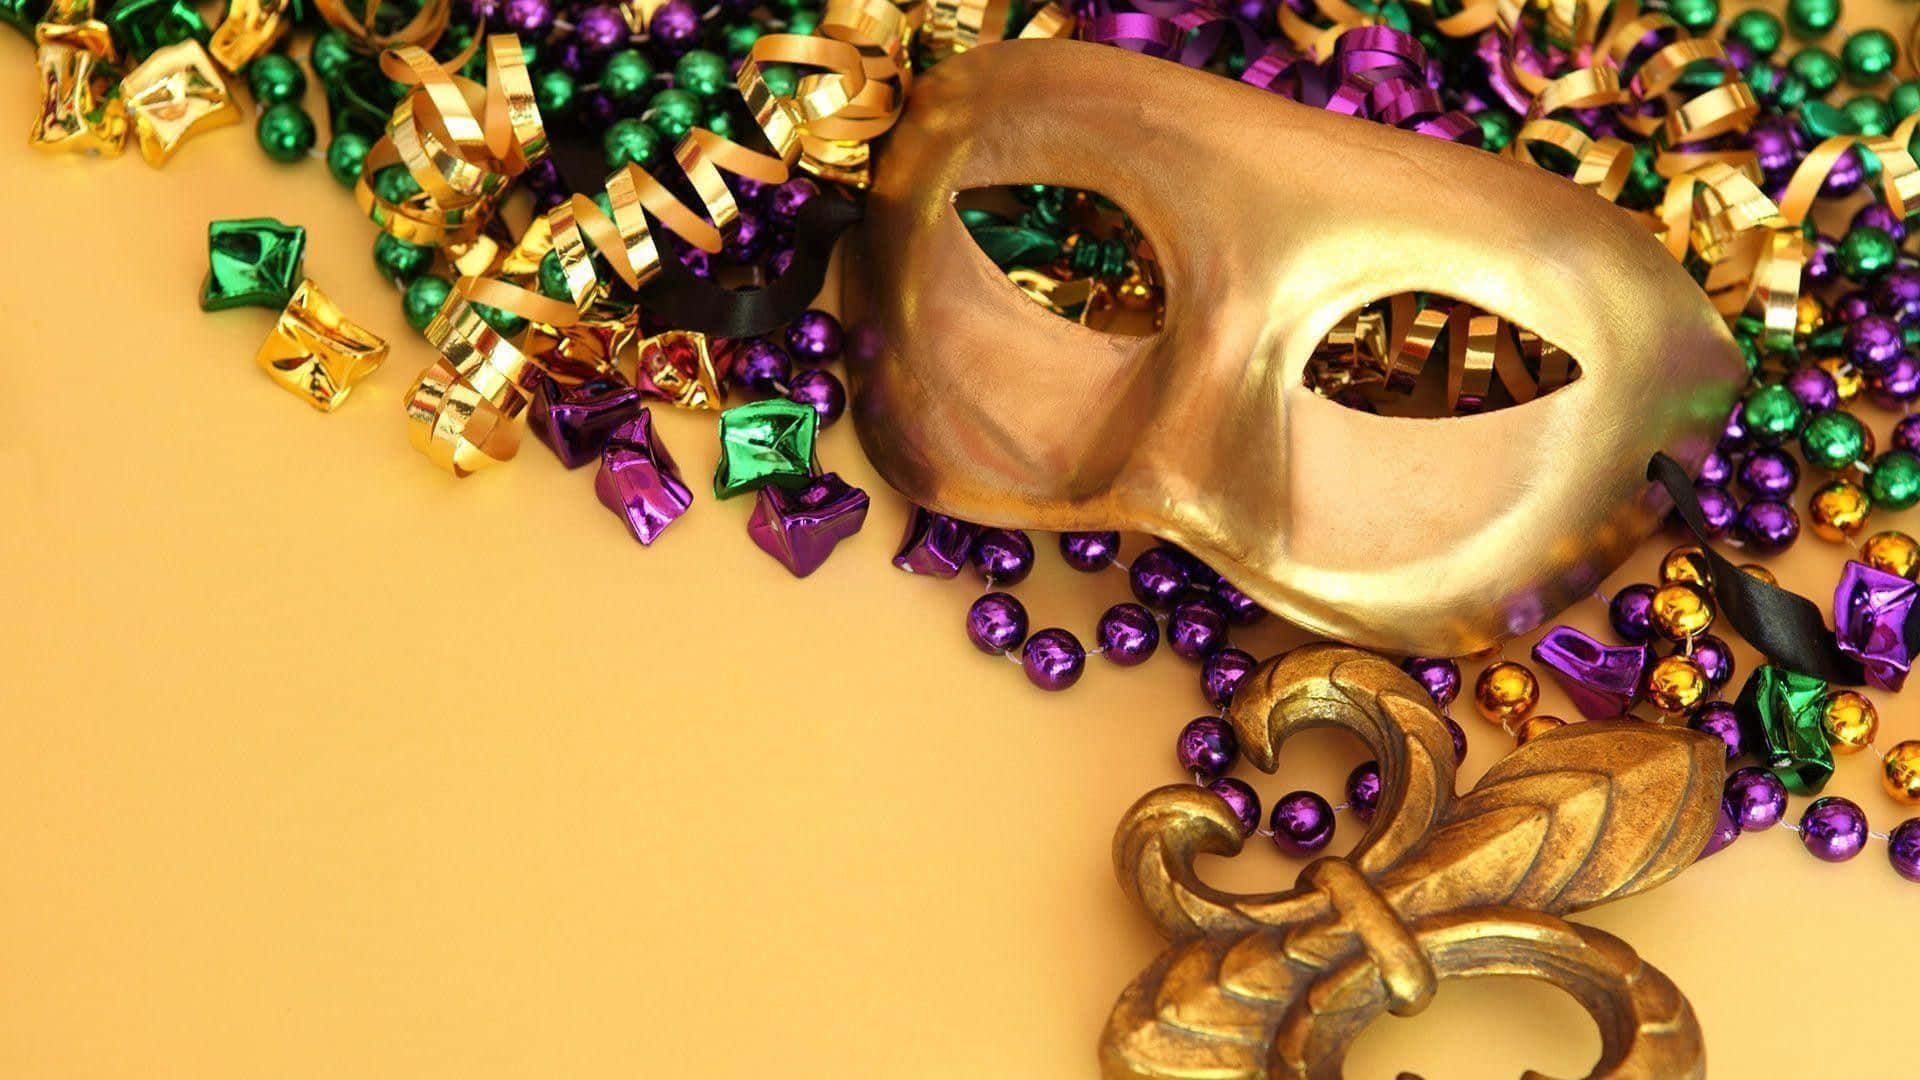 Mardi Gras Mask And Beads On A Yellow Background